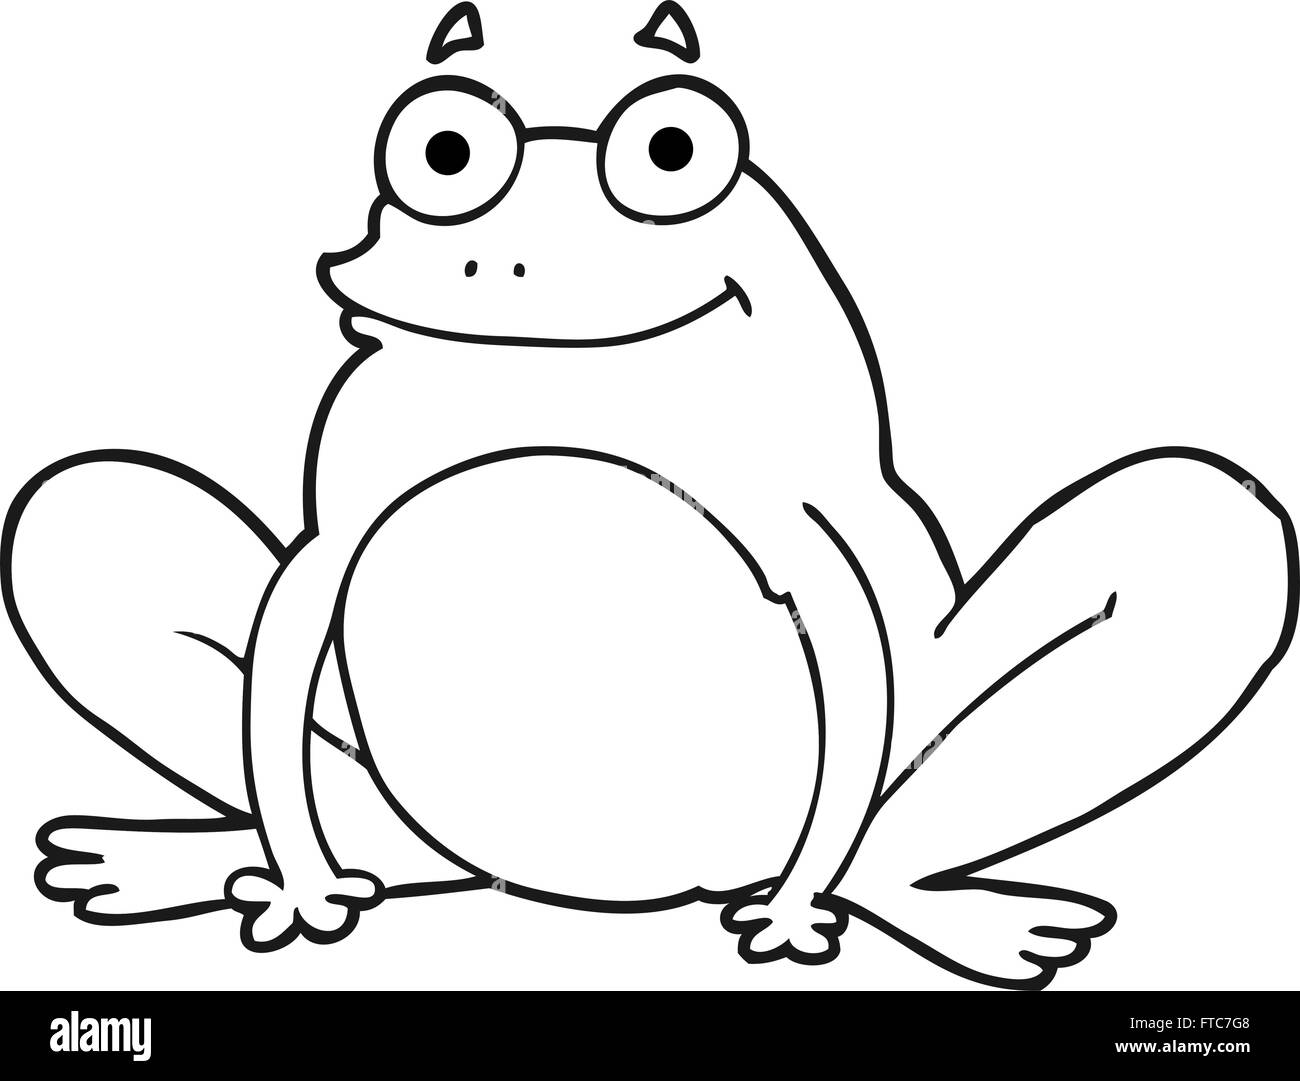 freehand drawn black and white cartoon happy frog Stock Vector